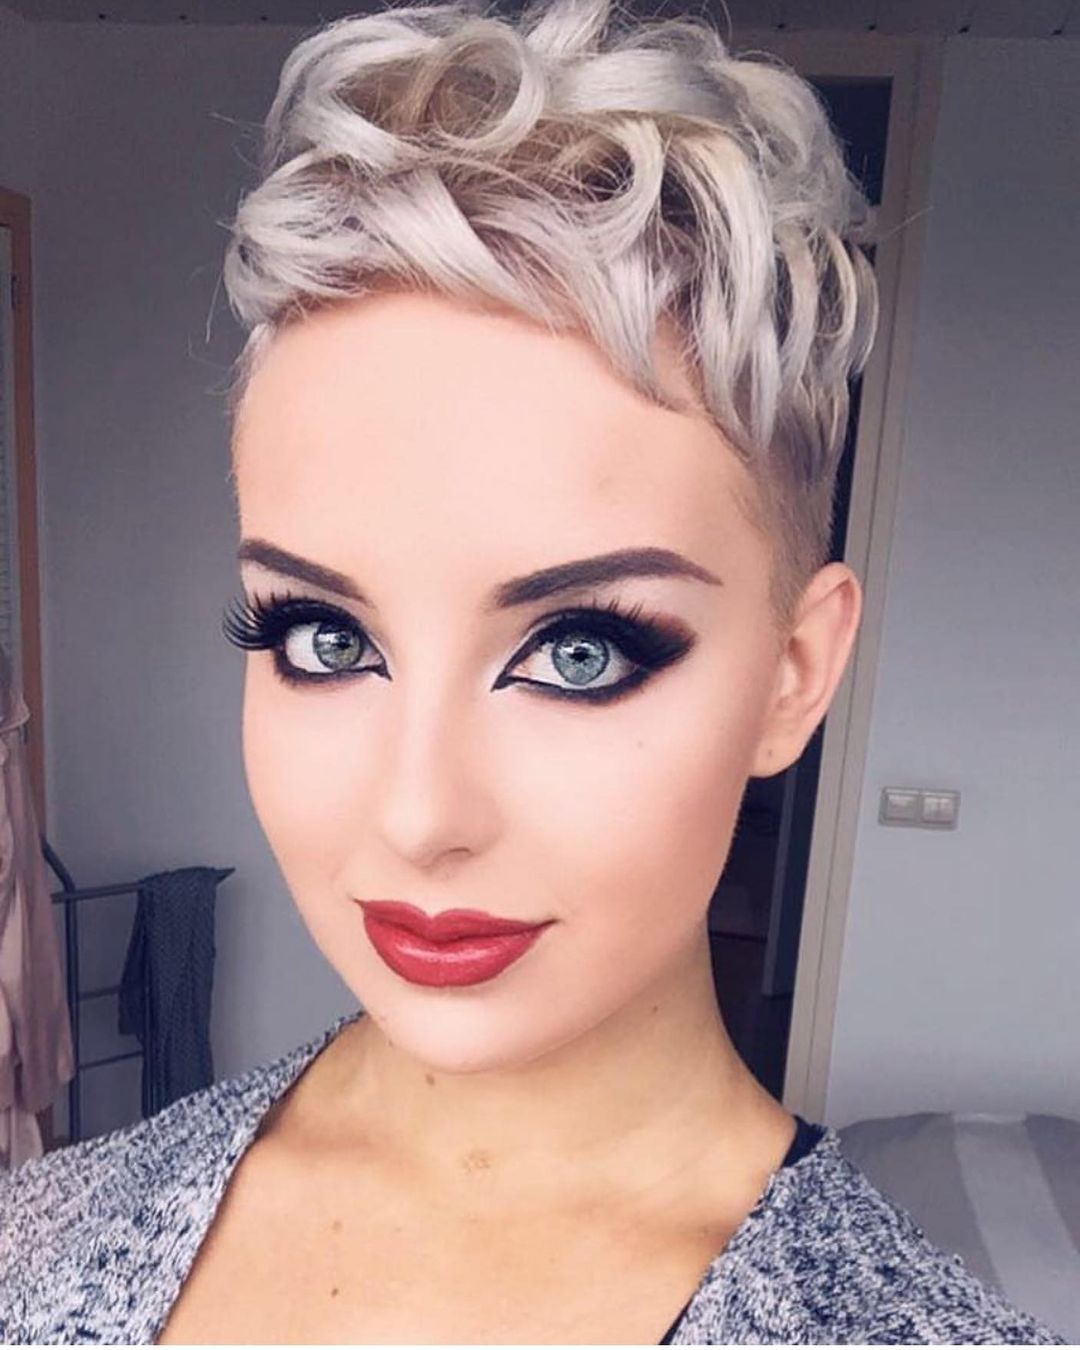 1676153258 718 41 Mind Blowing Best Short Hair Hairstyles For Fine Hair - 41 Mind Blowing Best Short Hair Hairstyles For Fine Hair